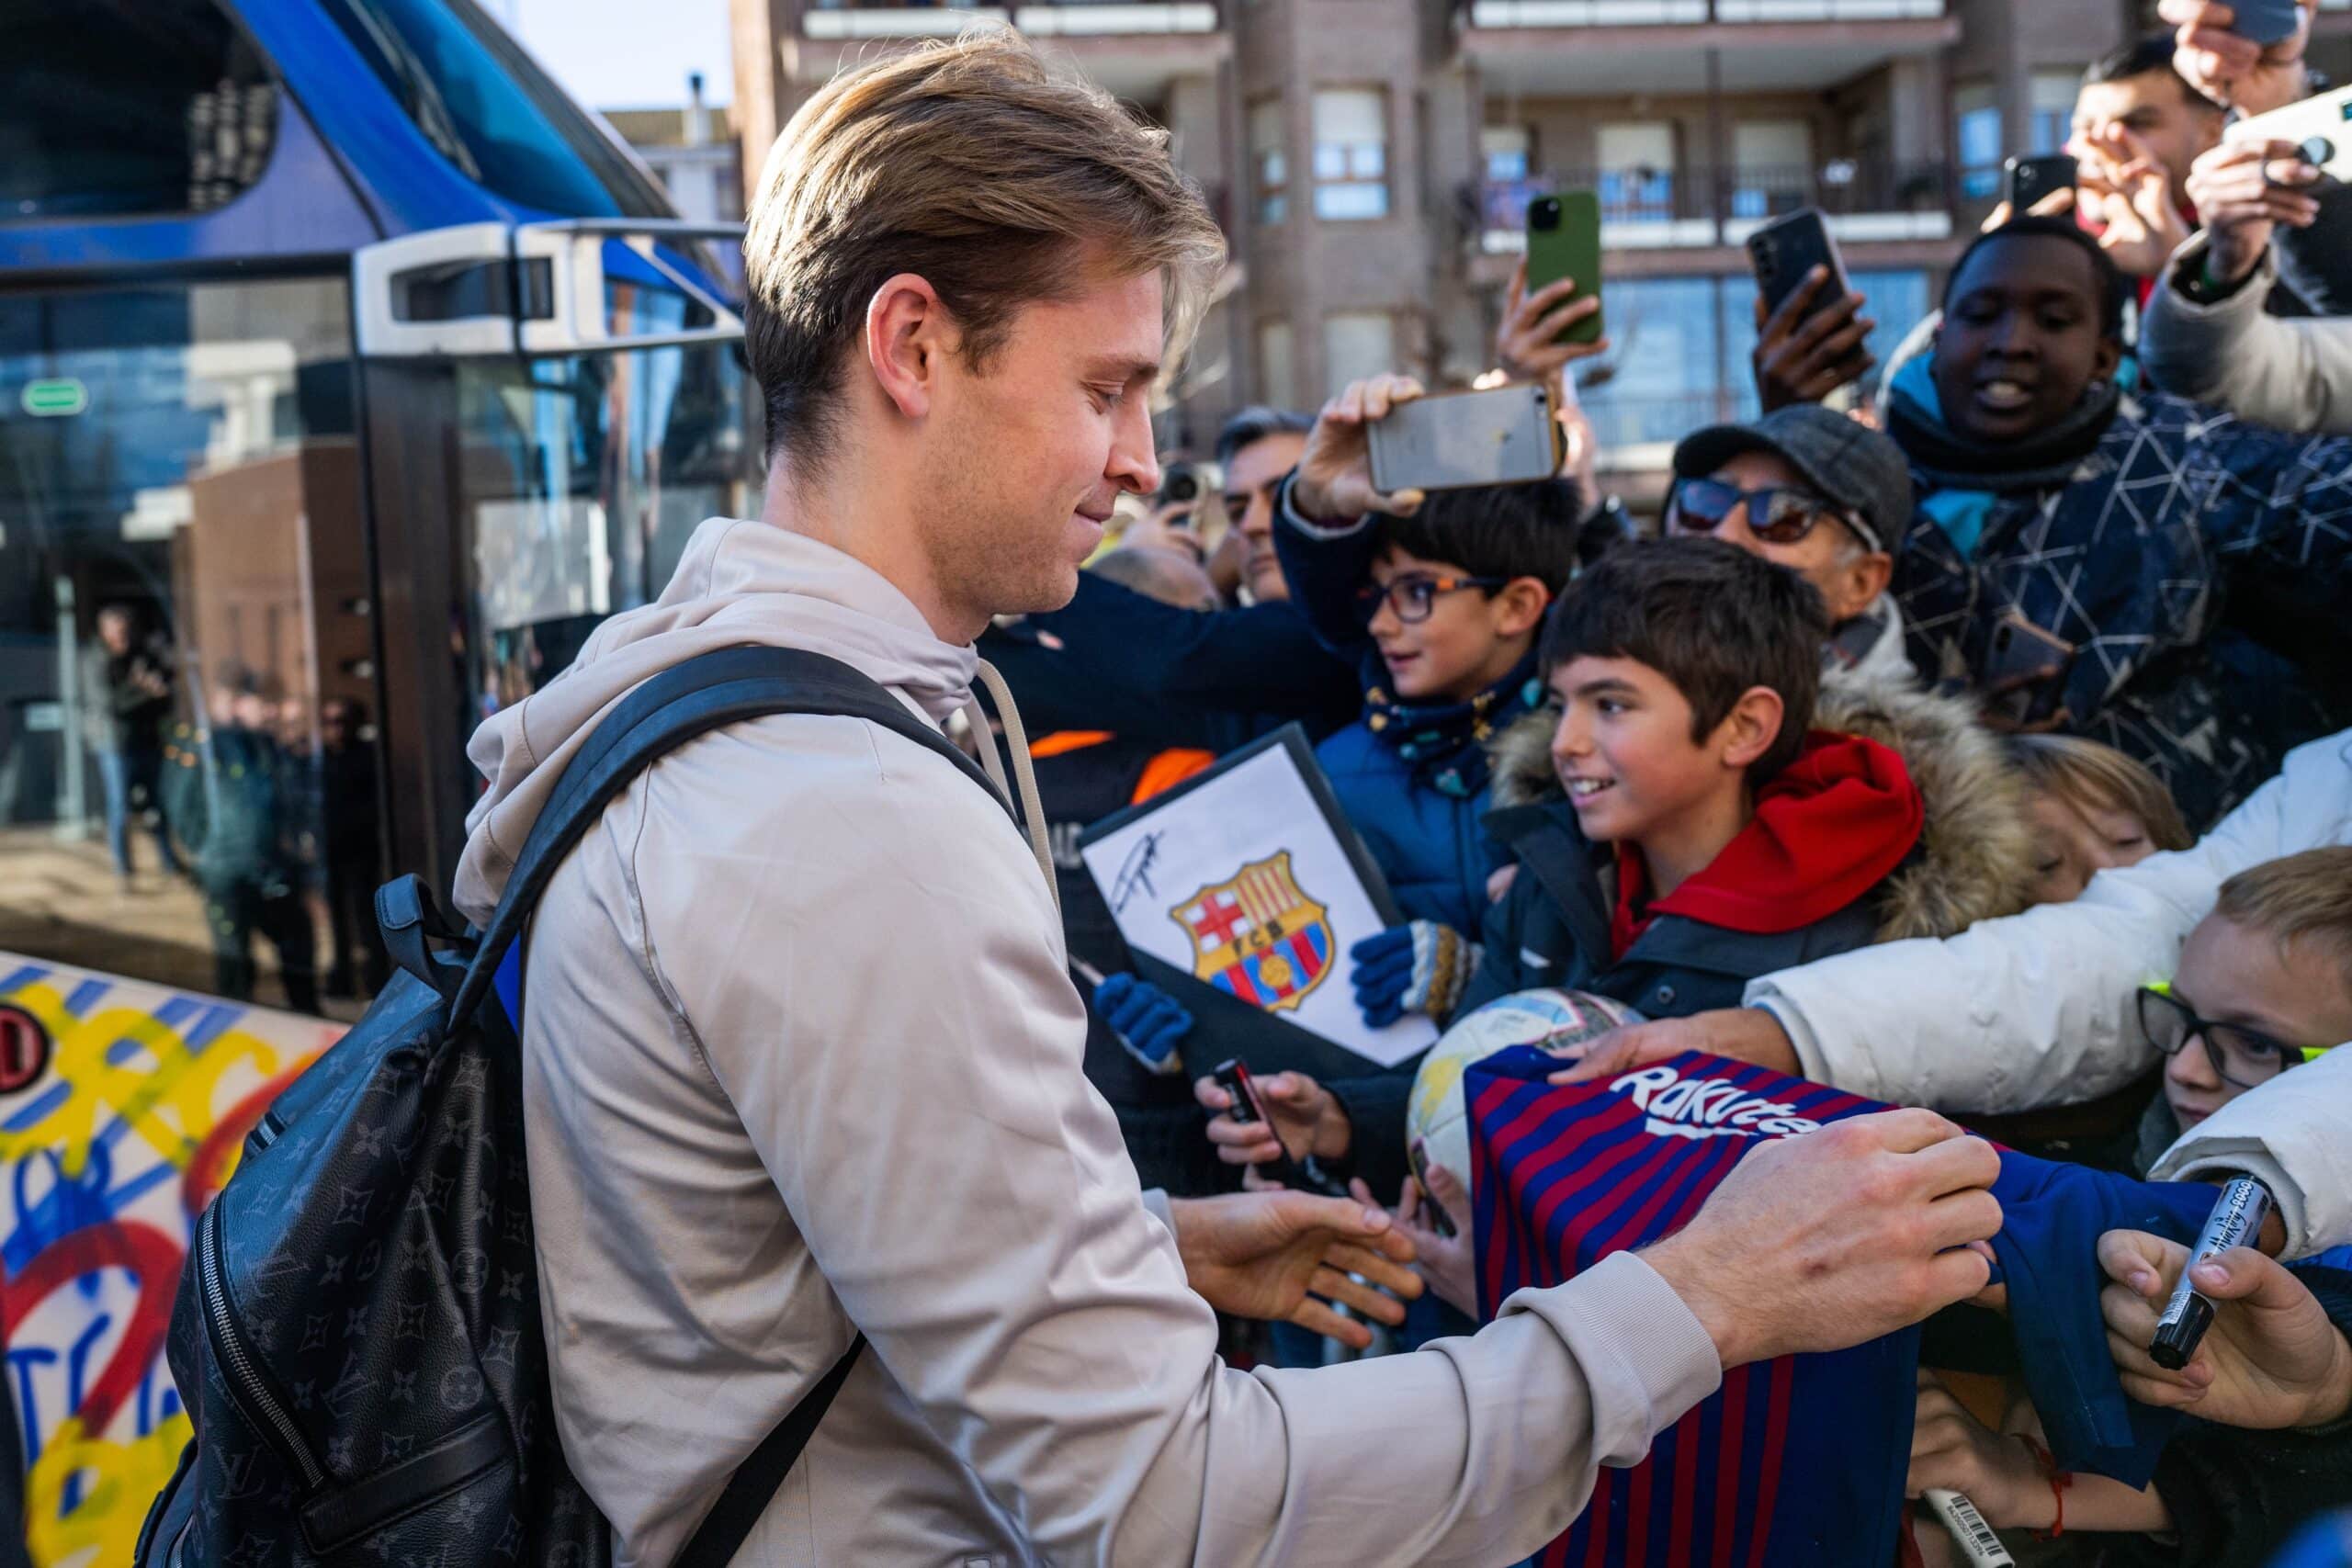 Ultimate Guide: How to Meet Your Favorite FC Barcelona Players – A Step-by-Step Fan Strategy